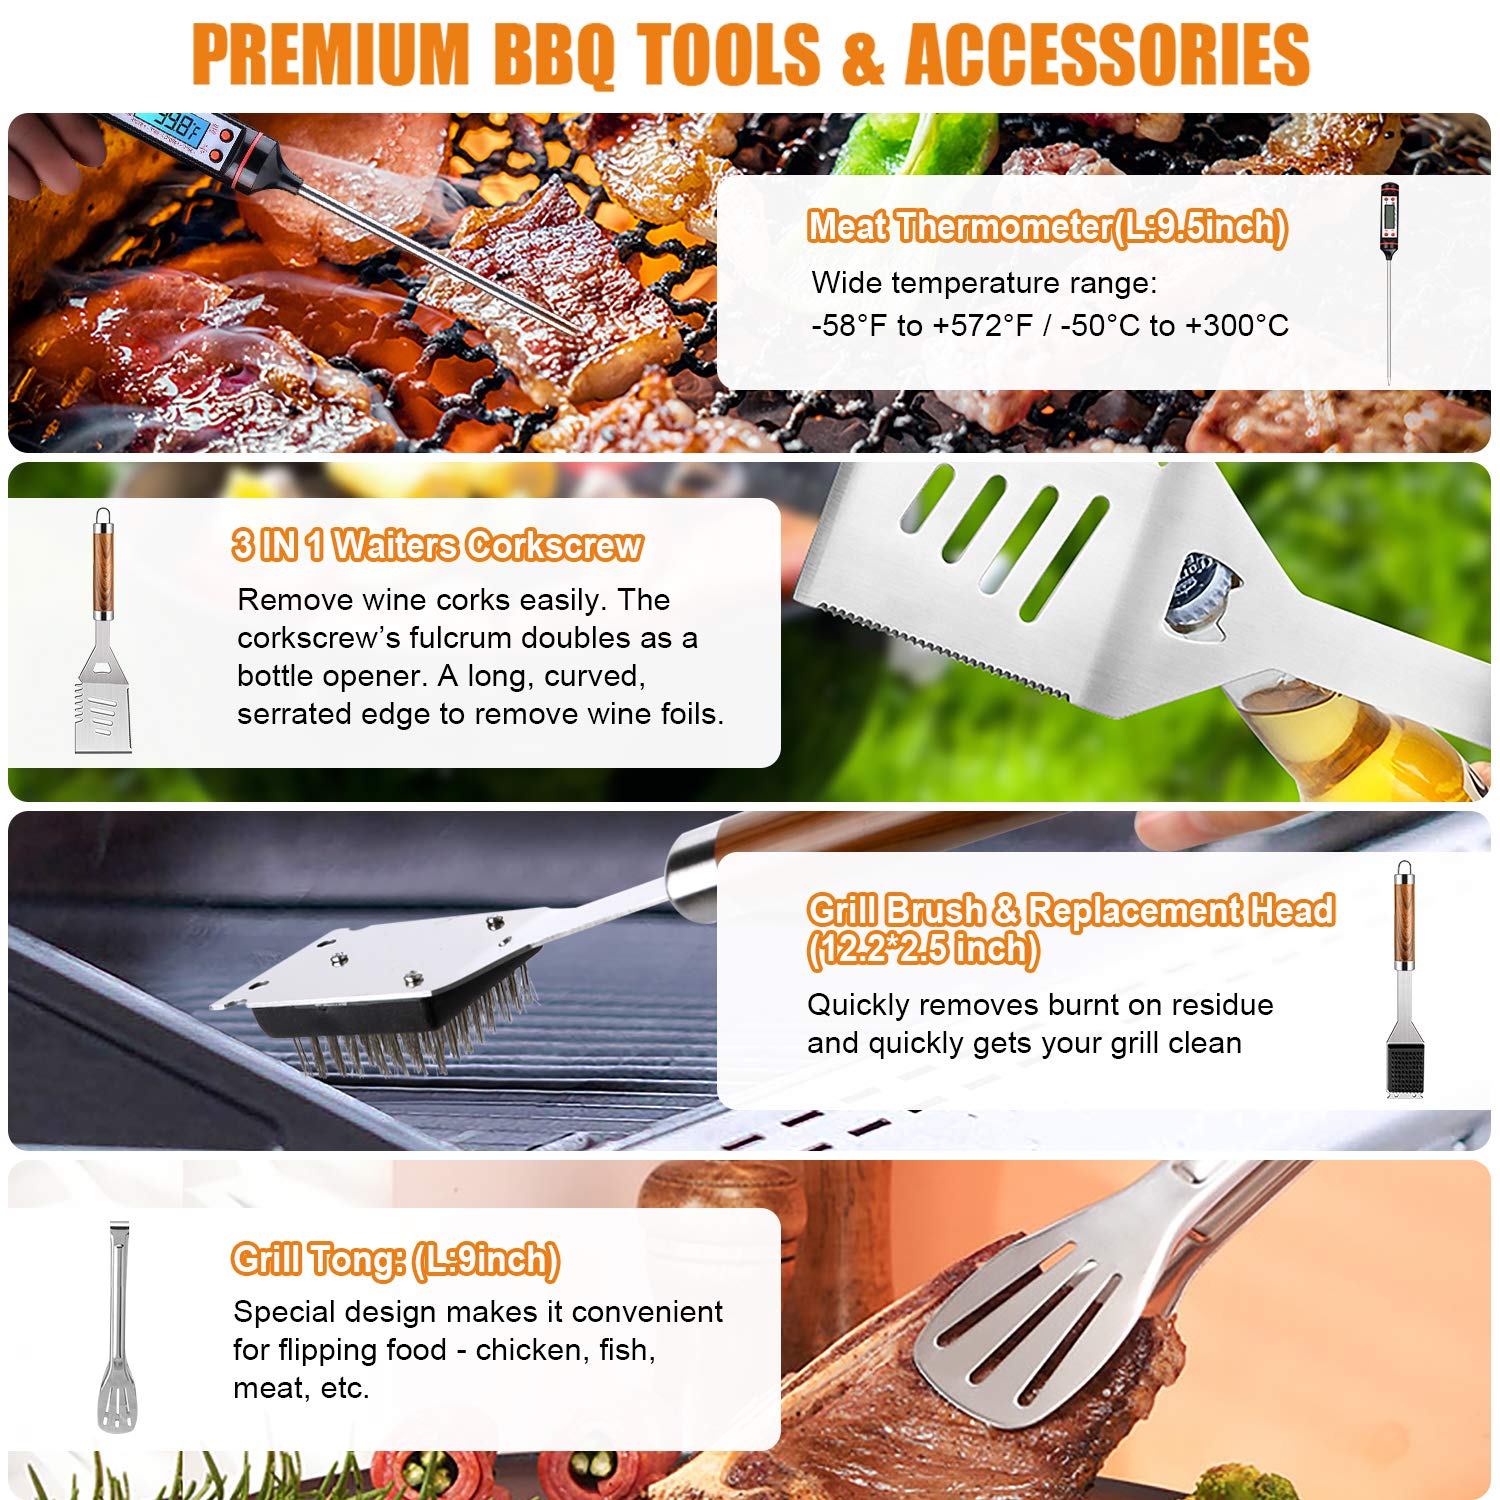 BBQ Grill Accessories Set, 38Pcs Stainless Steel Grill Tools Grilling Accessories with Aluminum Case, for Camping/Backyard Barbecue - image 5 of 7